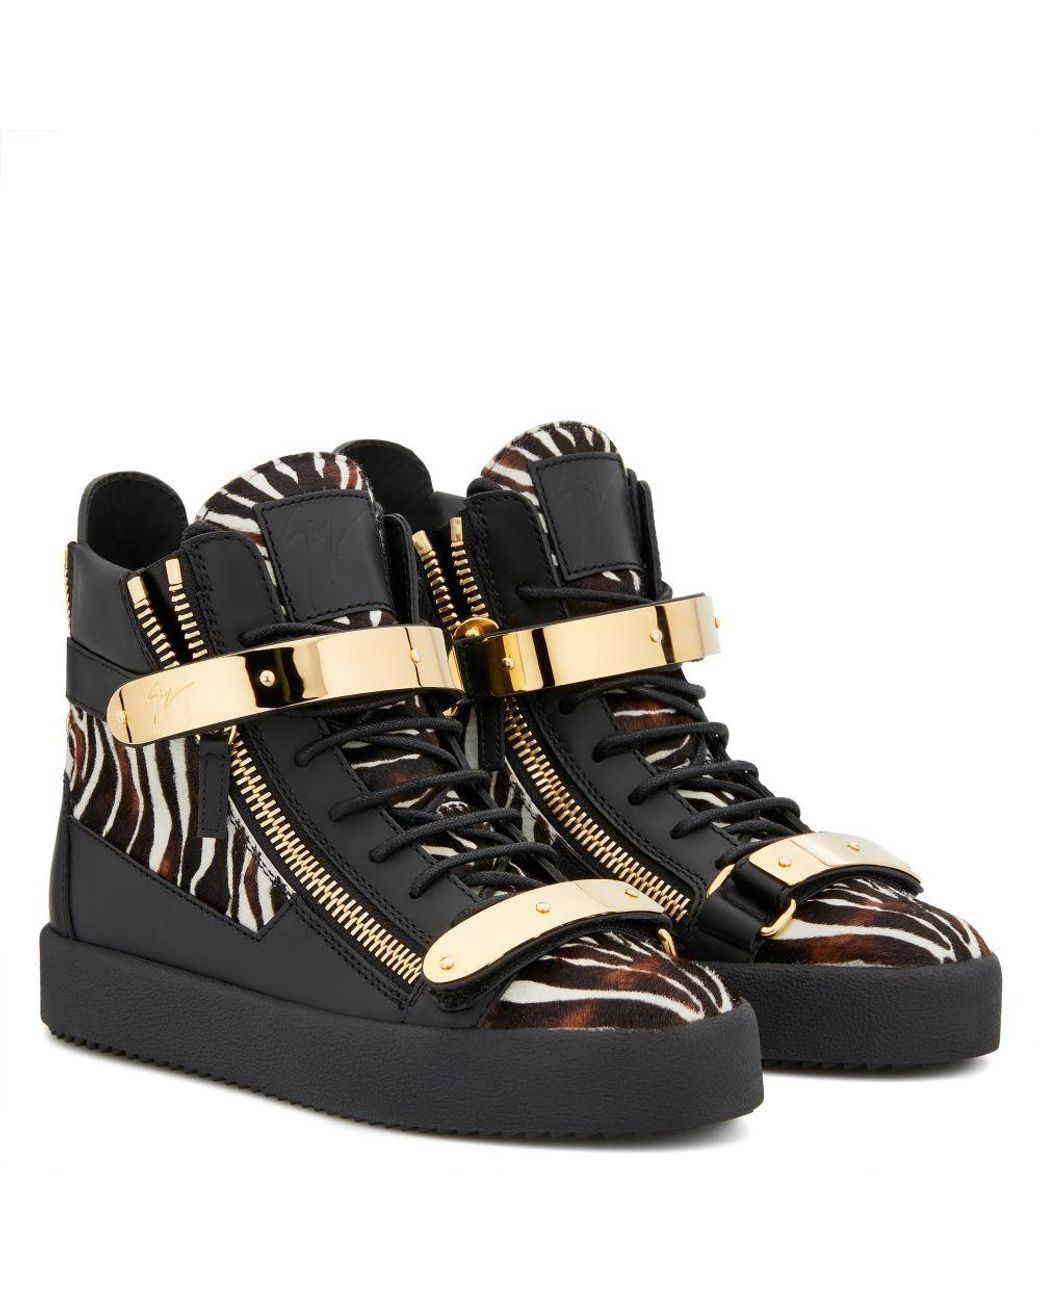 Giuseppe Zanotti Leather Coby Exotic Sneakers in Black - Save 23% - Lyst